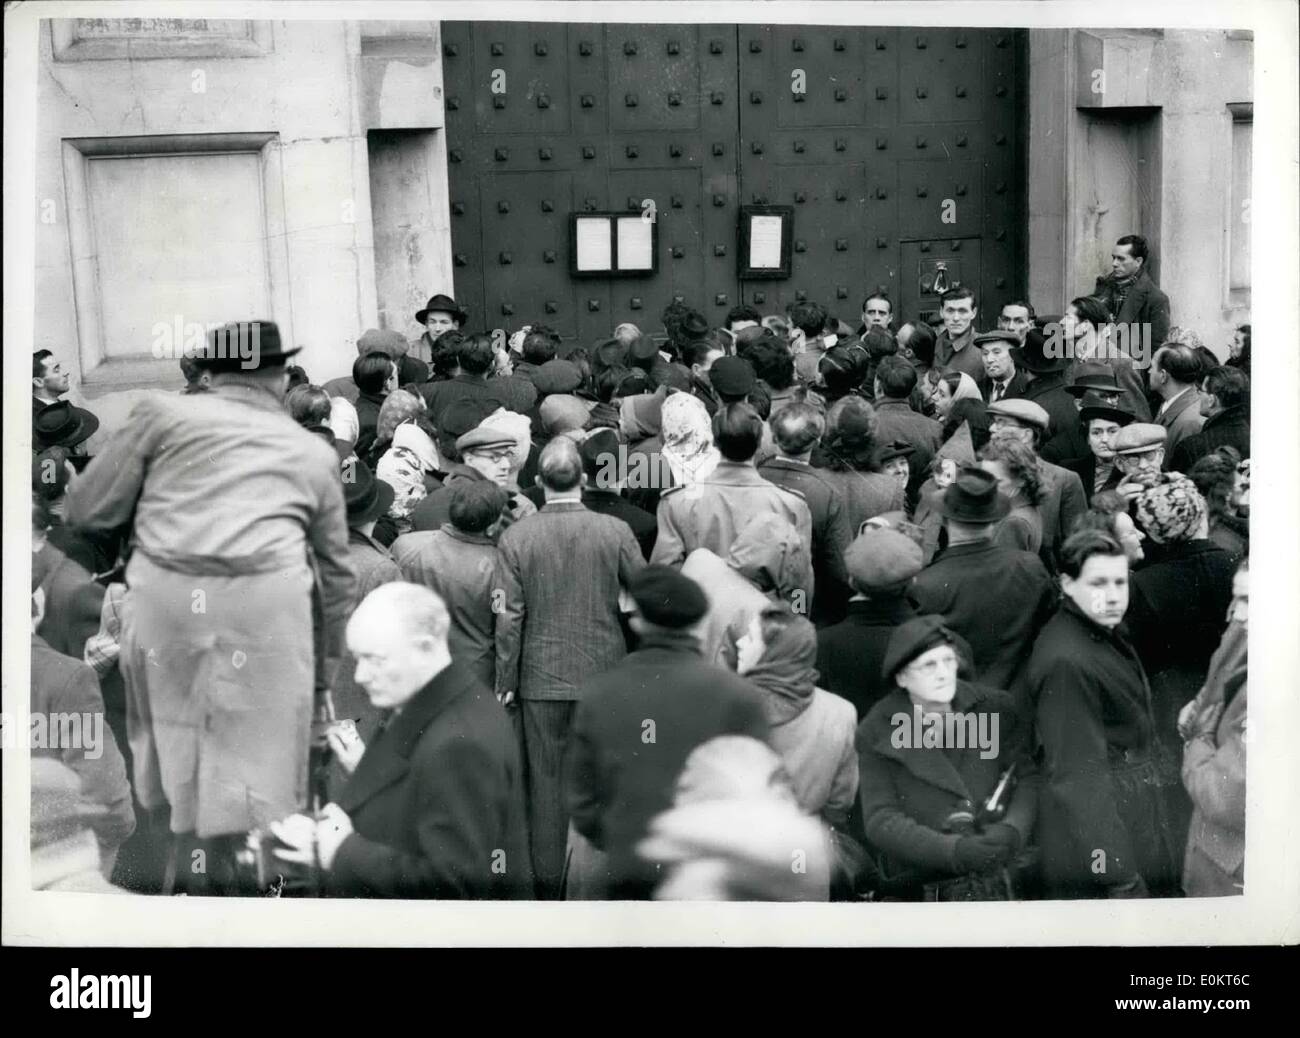 Jan. 01, 1950 - Execution of Daniel Raven pinning up the notice at Pentonville. Photo shows the scene as the crowd looks at the Stock Photo